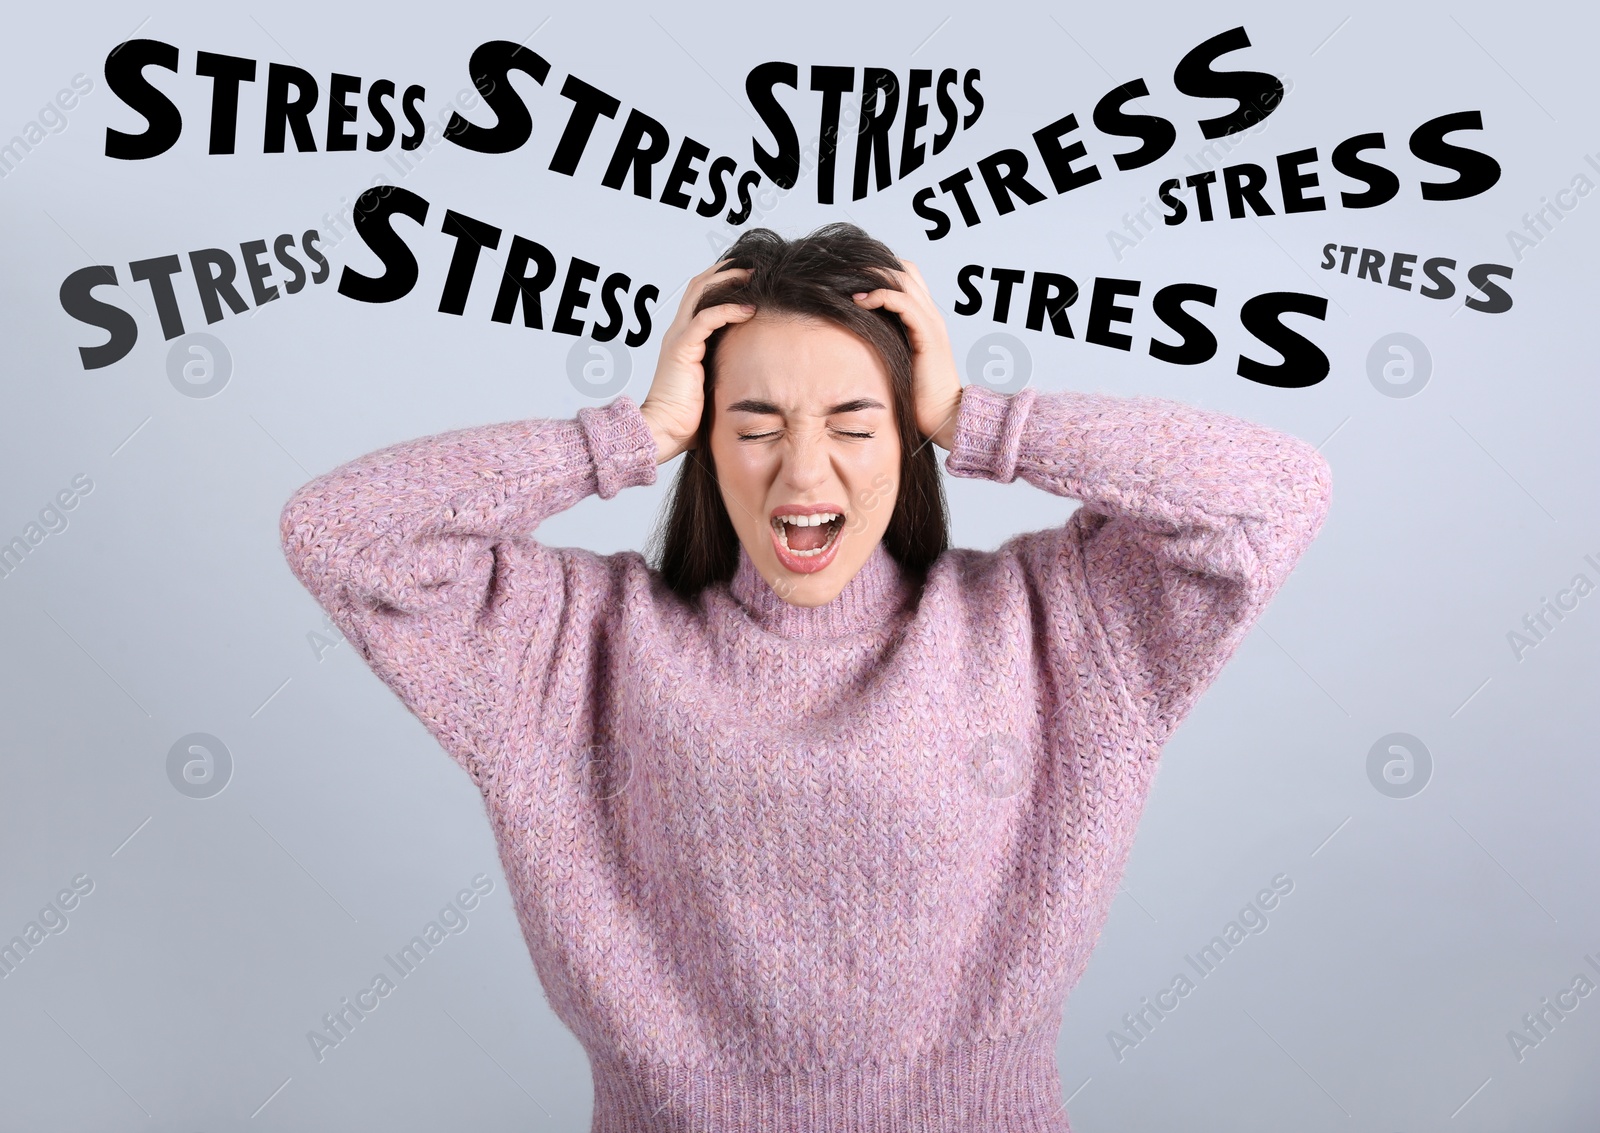 Image of Stressed young woman and text on light grey background